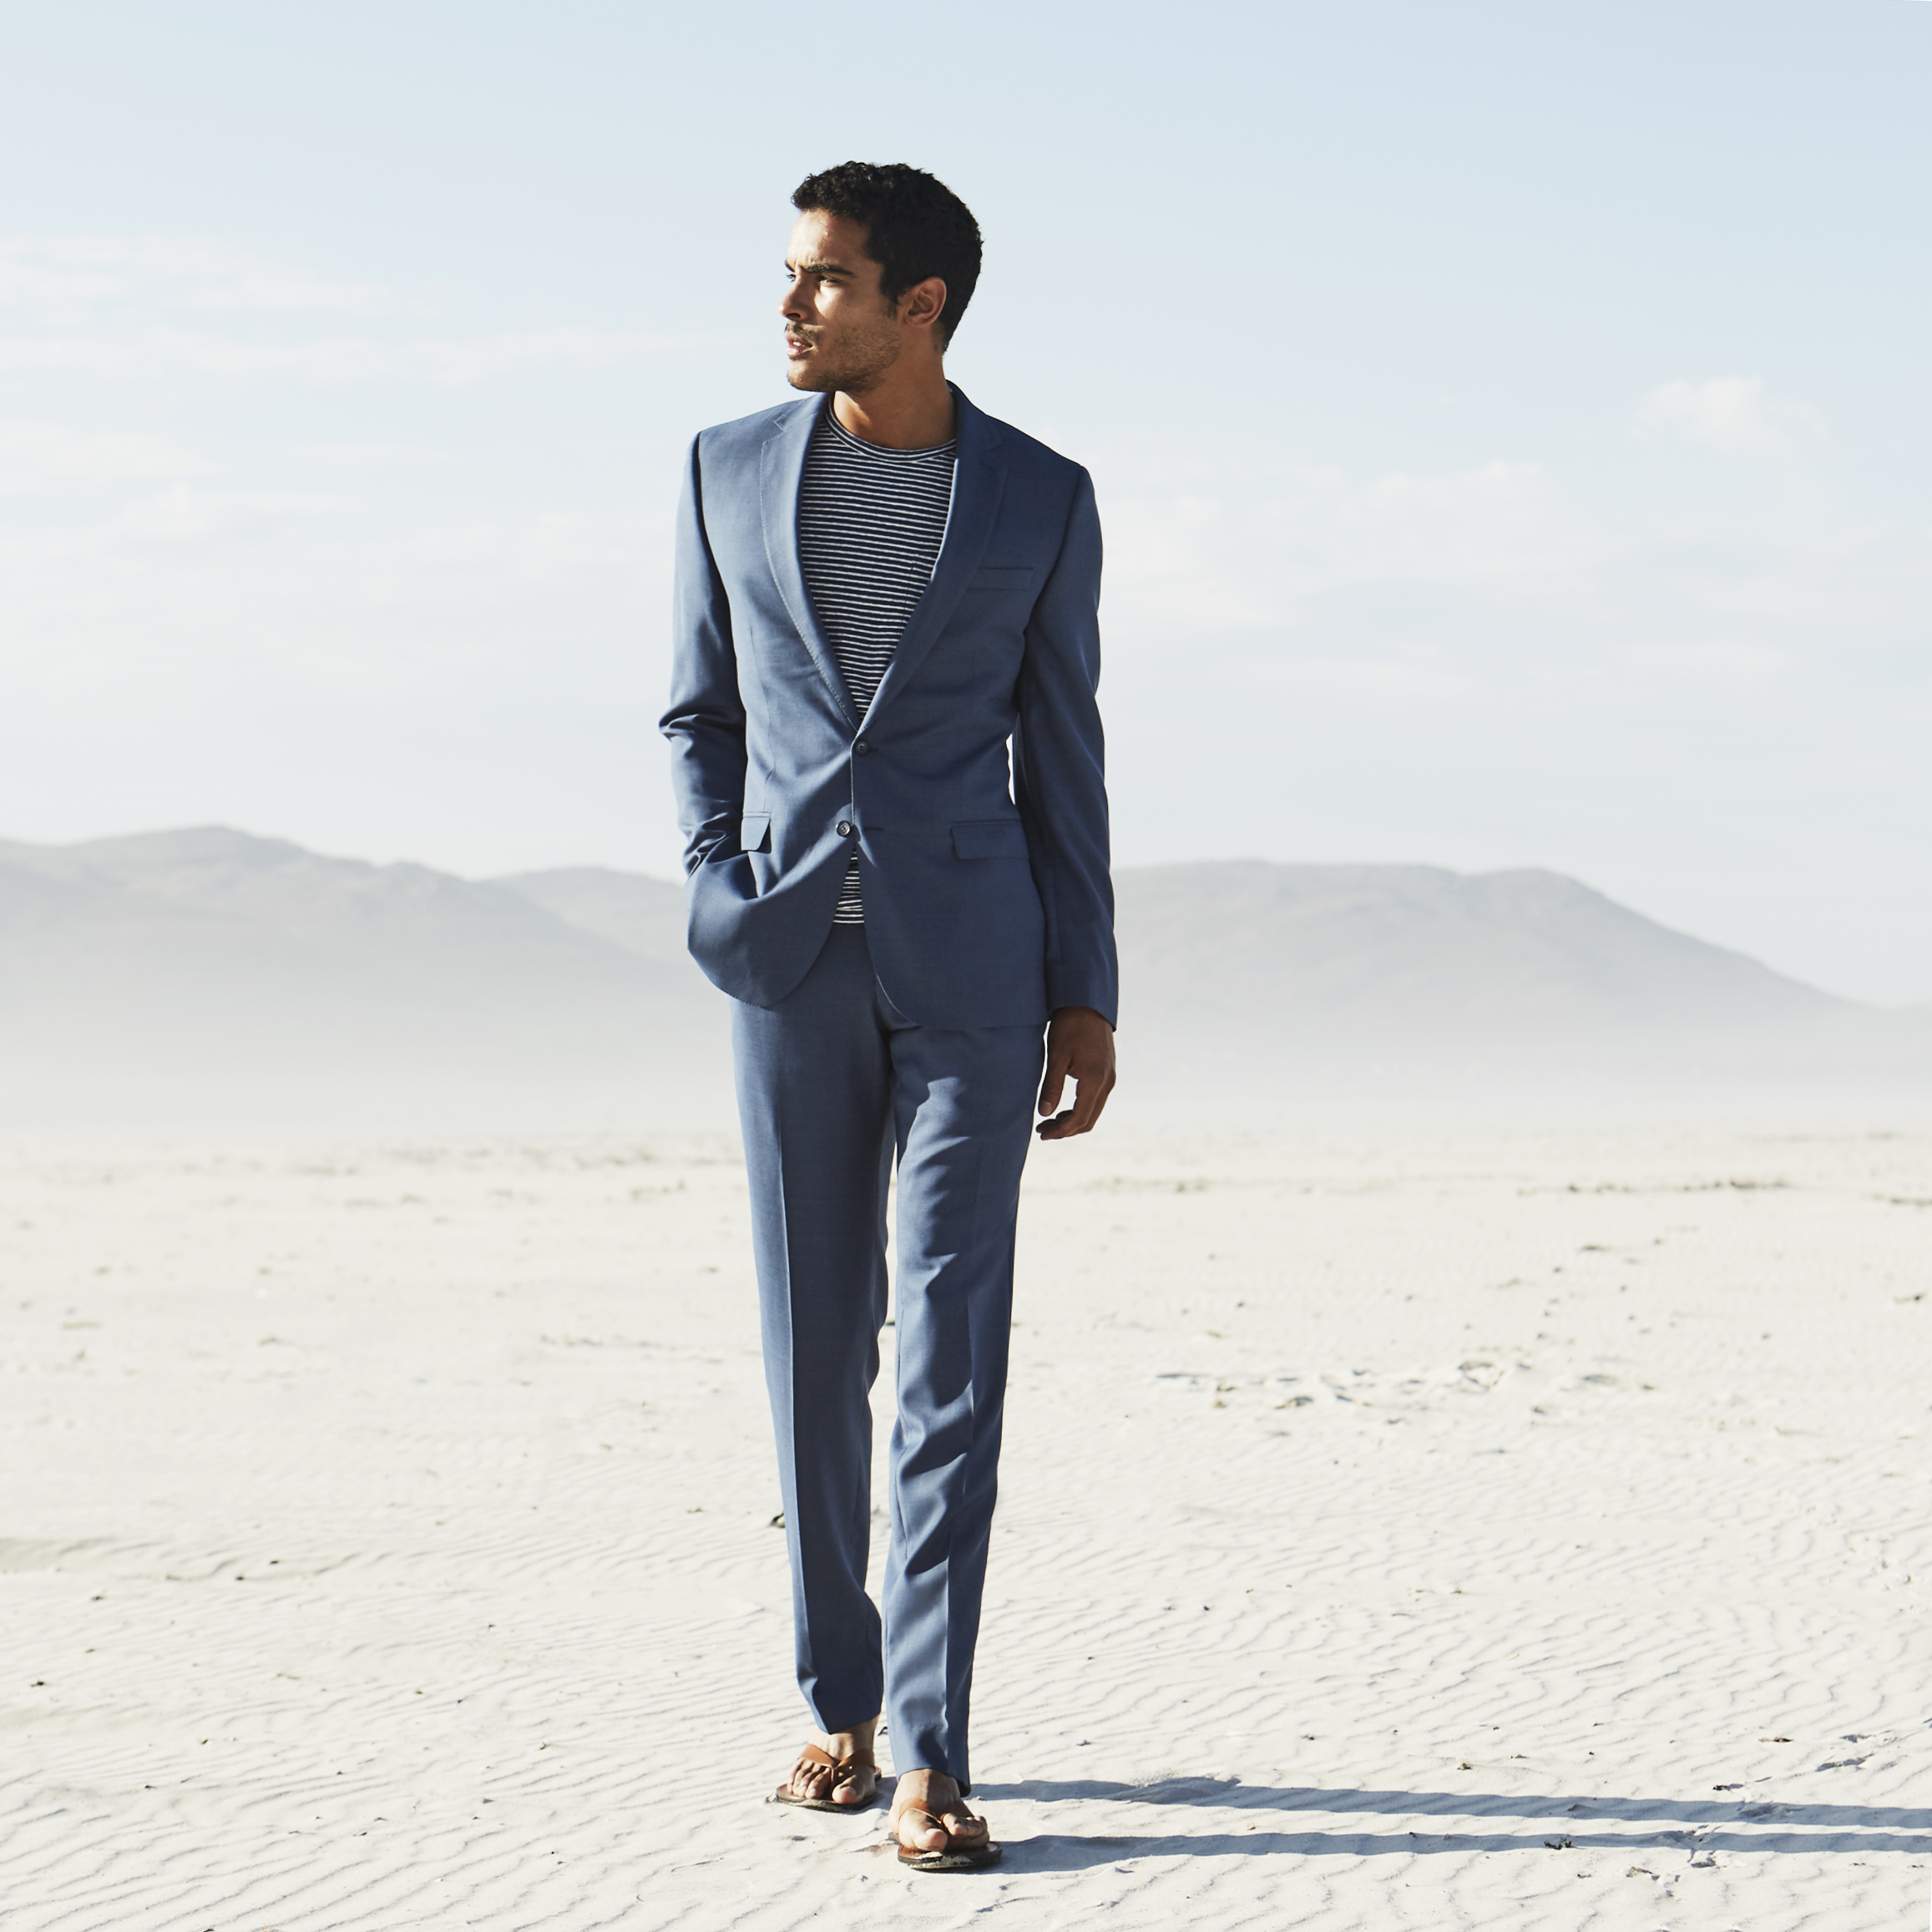 COUNTRY ROAD SS16 | THE SUMMER SUIT